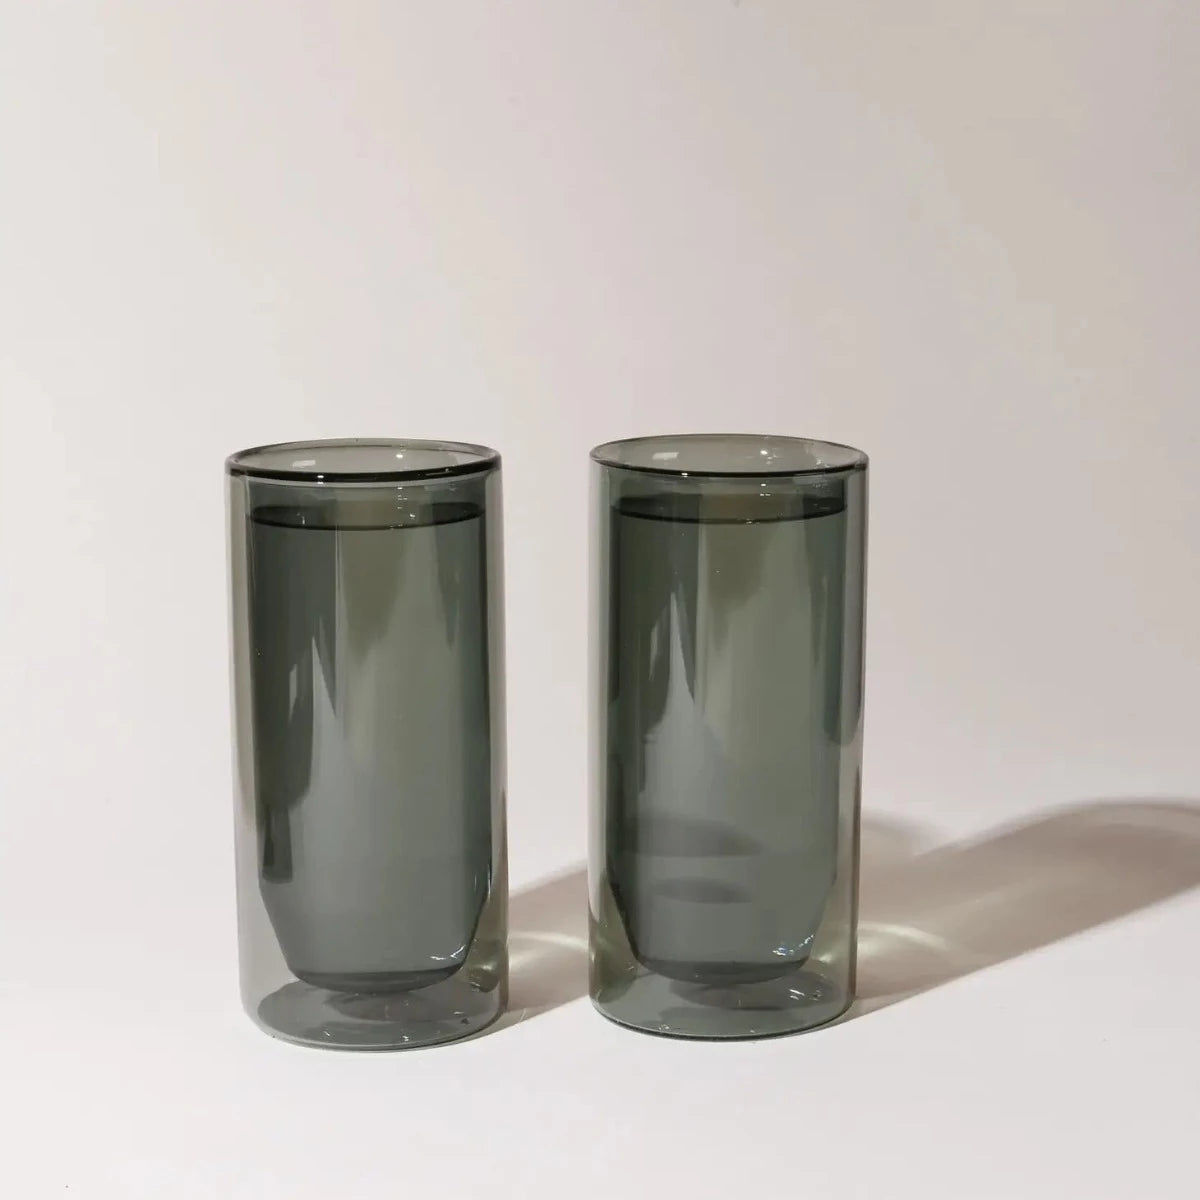 Double Walled Glass Set - Gray